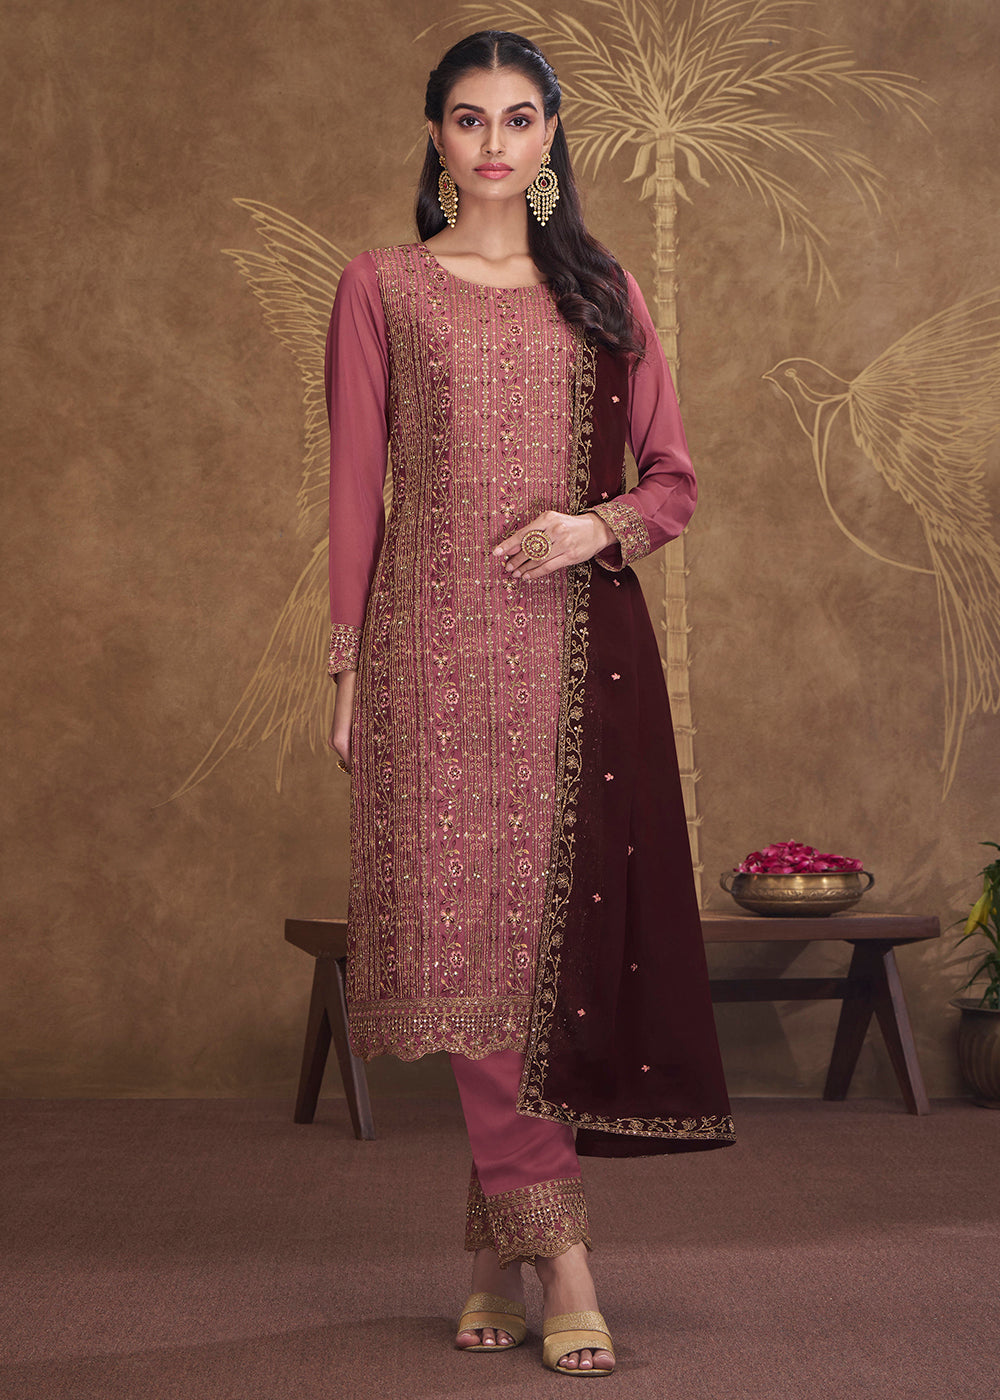 Buy Now Dreamy Pink Embroidered Art Silk Festive Pant Style Salwar Suit Online in USA, UK, Canada, Germany, Australia & Worldwide at Empress Clothing.